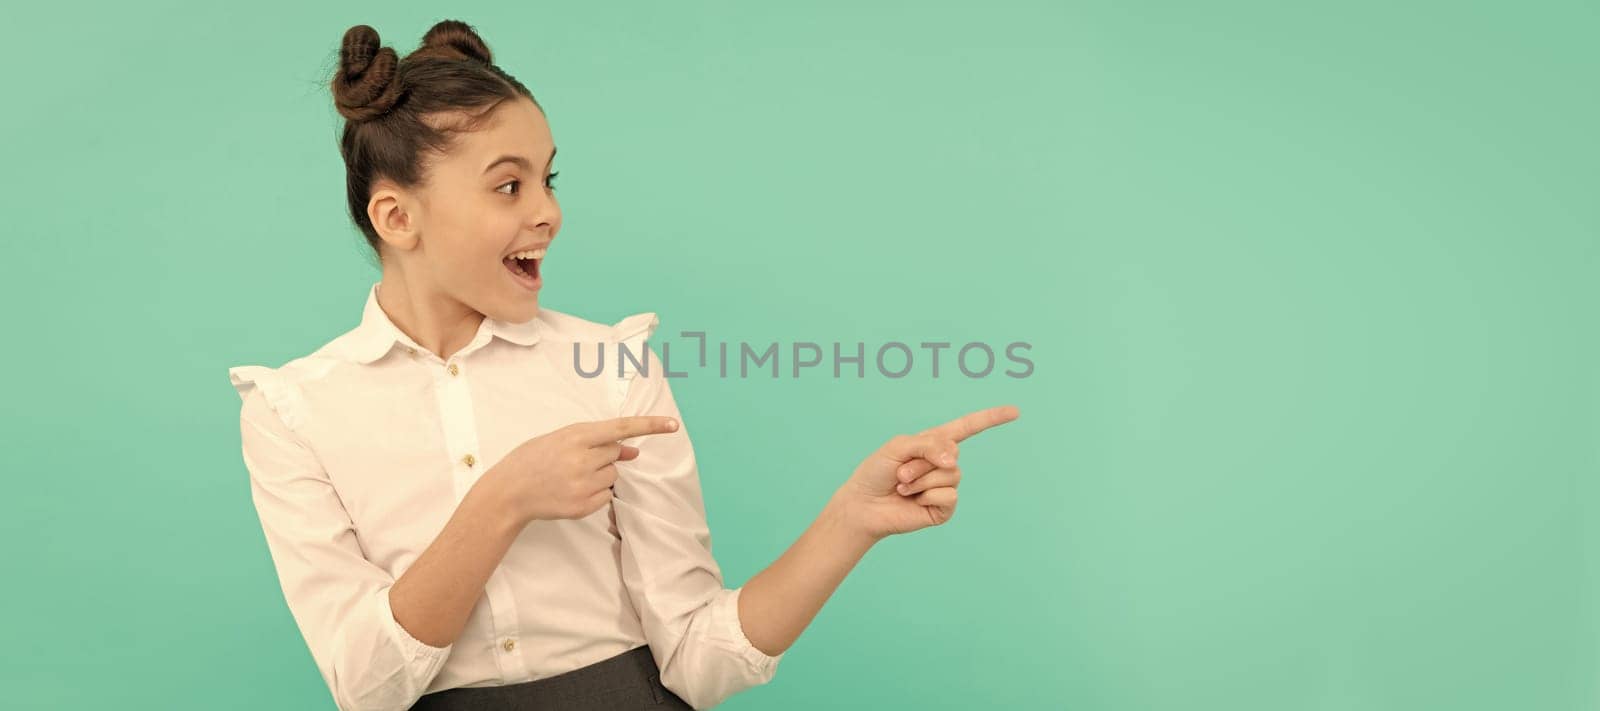 Exclusive. Happy schoolchild point fingers. Pointing gesture. Pointing for advertising. Child face, horizontal poster, teenager girl isolated portrait, banner with copy space